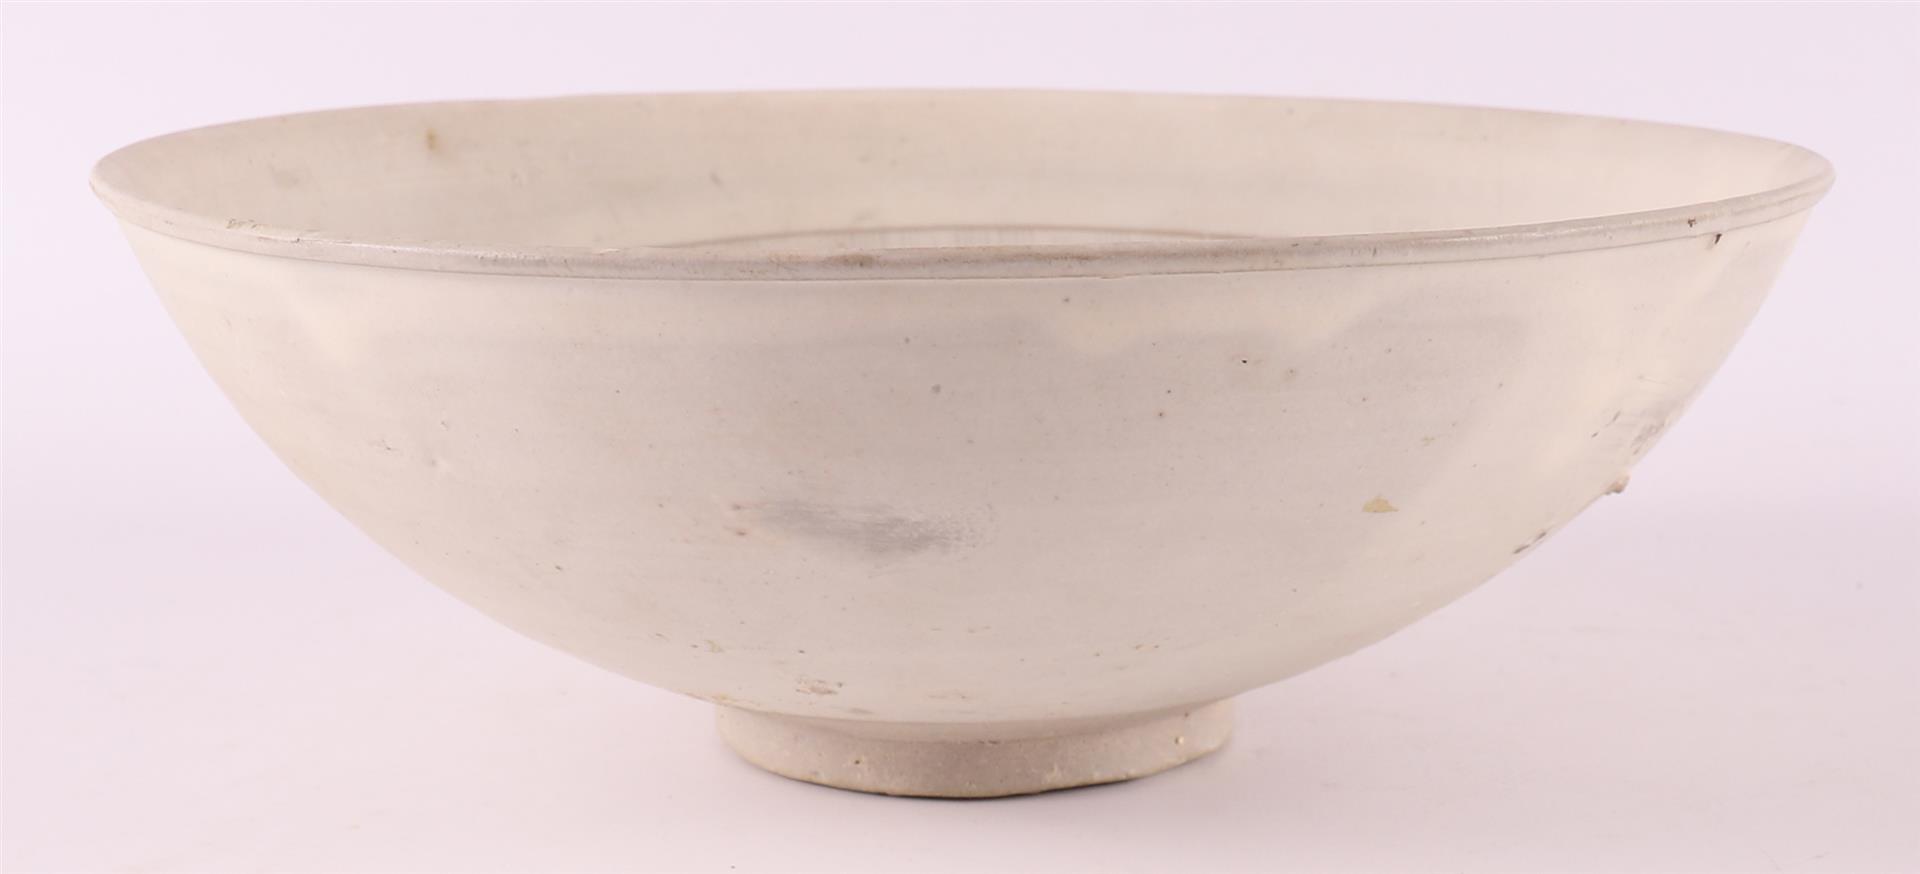 A white porcelain bowl with sgraffito decor, China, Sung, 12th/13th C. - Image 8 of 8